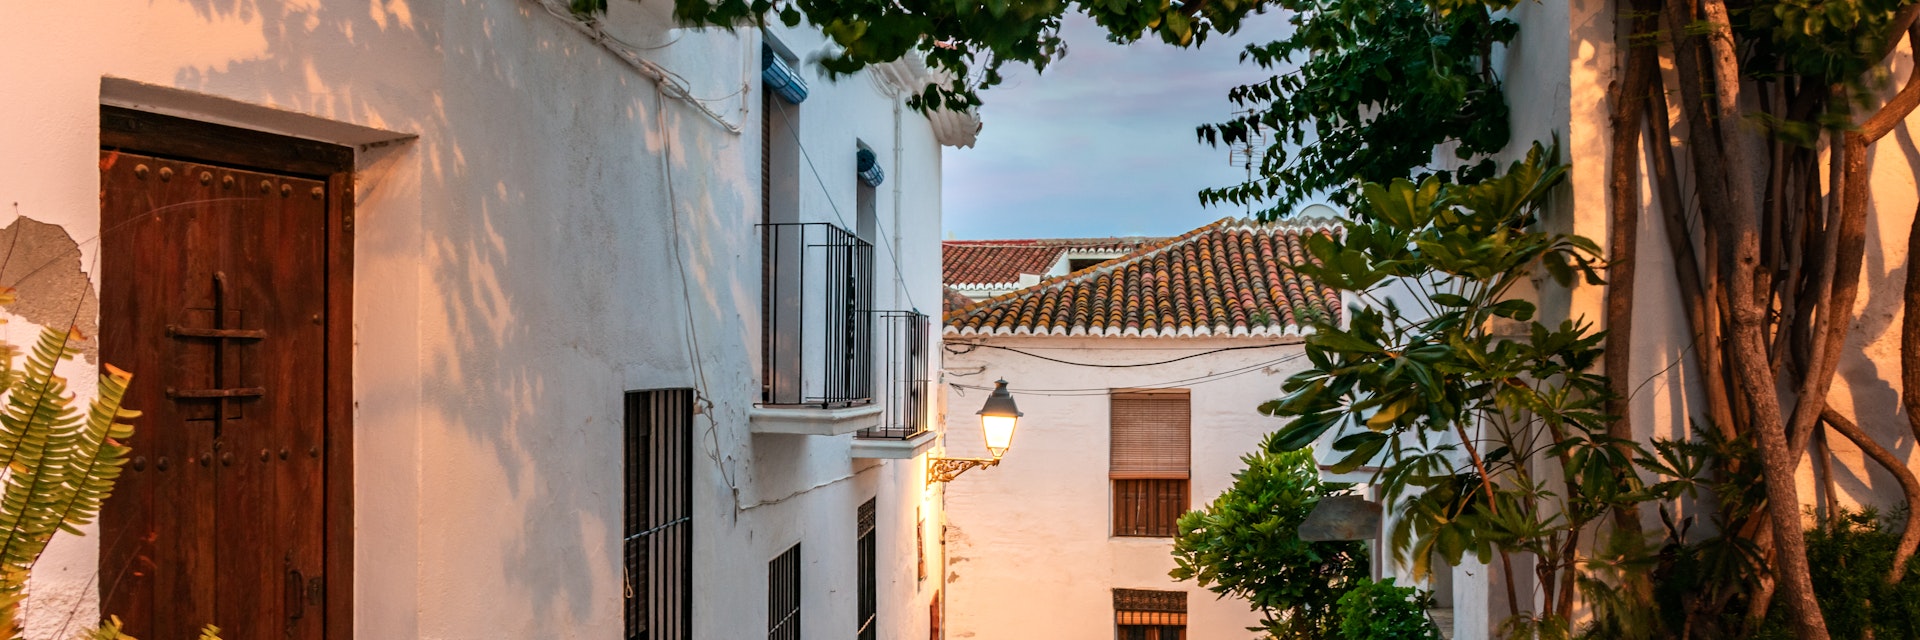 Alley at sunset with a lit street lamp, plants, pots and a vine that covers the roof of the street to shade in Salobreña, Granada.